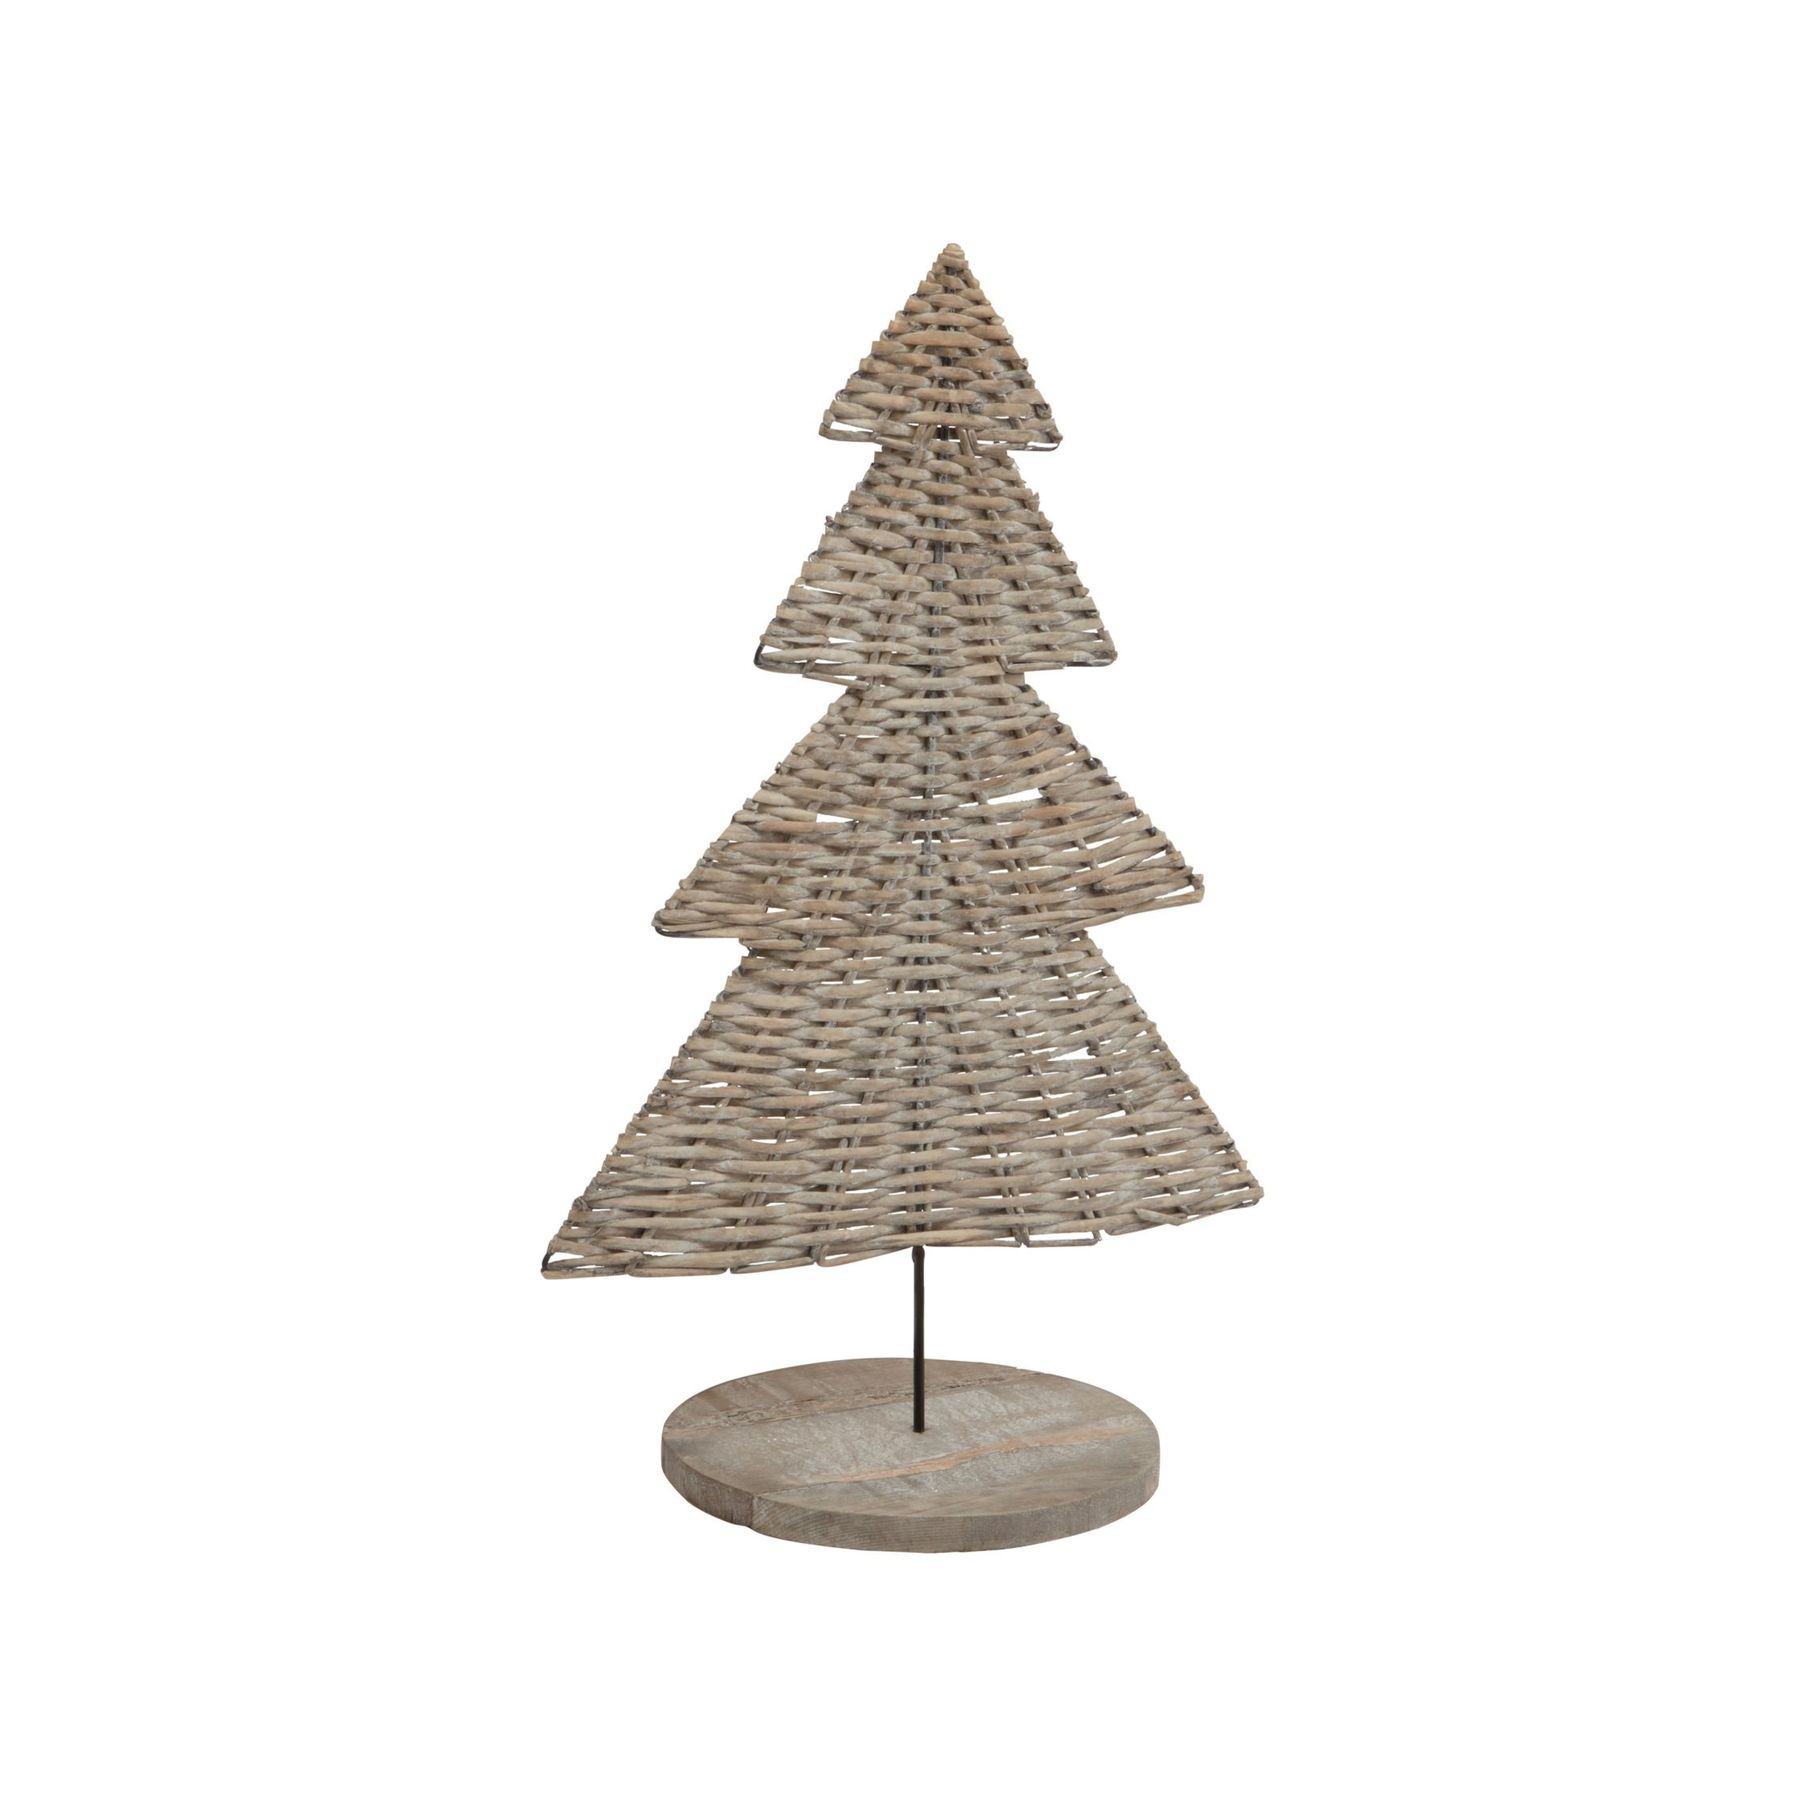 The Noel Collection Wicker Tree Ornament - Image 1